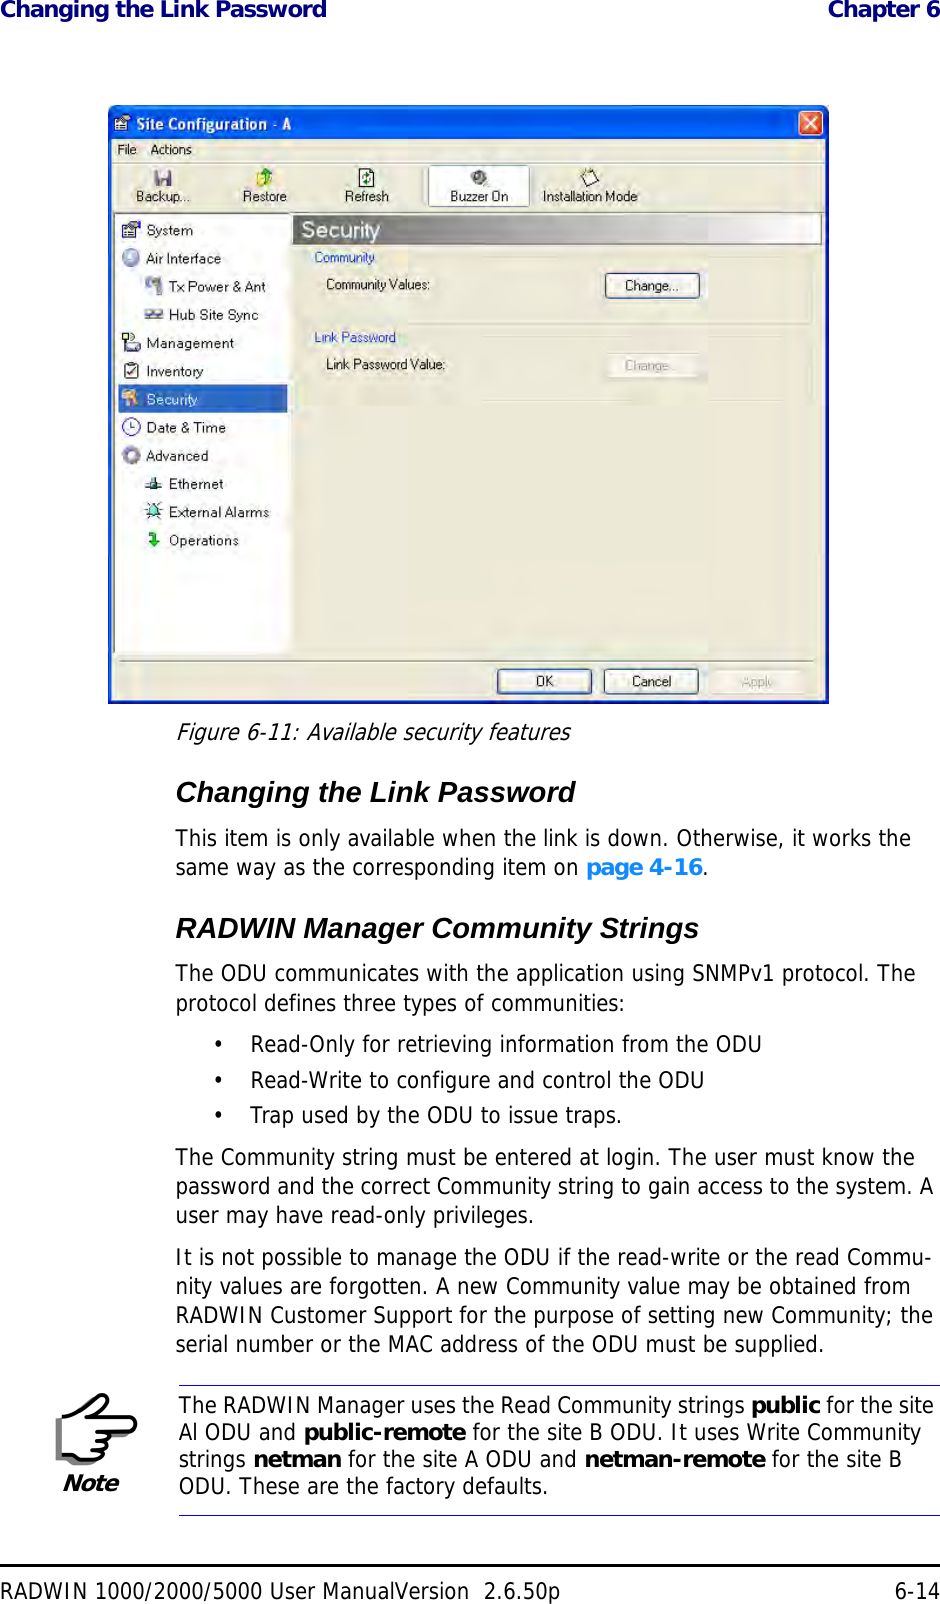 Changing the Link Password  Chapter 6RADWIN 1000/2000/5000 User ManualVersion  2.6.50p 6-14 Figure 6-11: Available security featuresChanging the Link PasswordThis item is only available when the link is down. Otherwise, it works the same way as the corresponding item on page 4-16.RADWIN Manager Community StringsThe ODU communicates with the application using SNMPv1 protocol. The protocol defines three types of communities:• Read-Only for retrieving information from the ODU• Read-Write to configure and control the ODU• Trap used by the ODU to issue traps.The Community string must be entered at login. The user must know the password and the correct Community string to gain access to the system. A user may have read-only privileges.It is not possible to manage the ODU if the read-write or the read Commu-nity values are forgotten. A new Community value may be obtained from RADWIN Customer Support for the purpose of setting new Community; the serial number or the MAC address of the ODU must be supplied.NoteThe RADWIN Manager uses the Read Community strings public for the site Al ODU and public-remote for the site B ODU. It uses Write Community strings netman for the site A ODU and netman-remote for the site B ODU. These are the factory defaults.